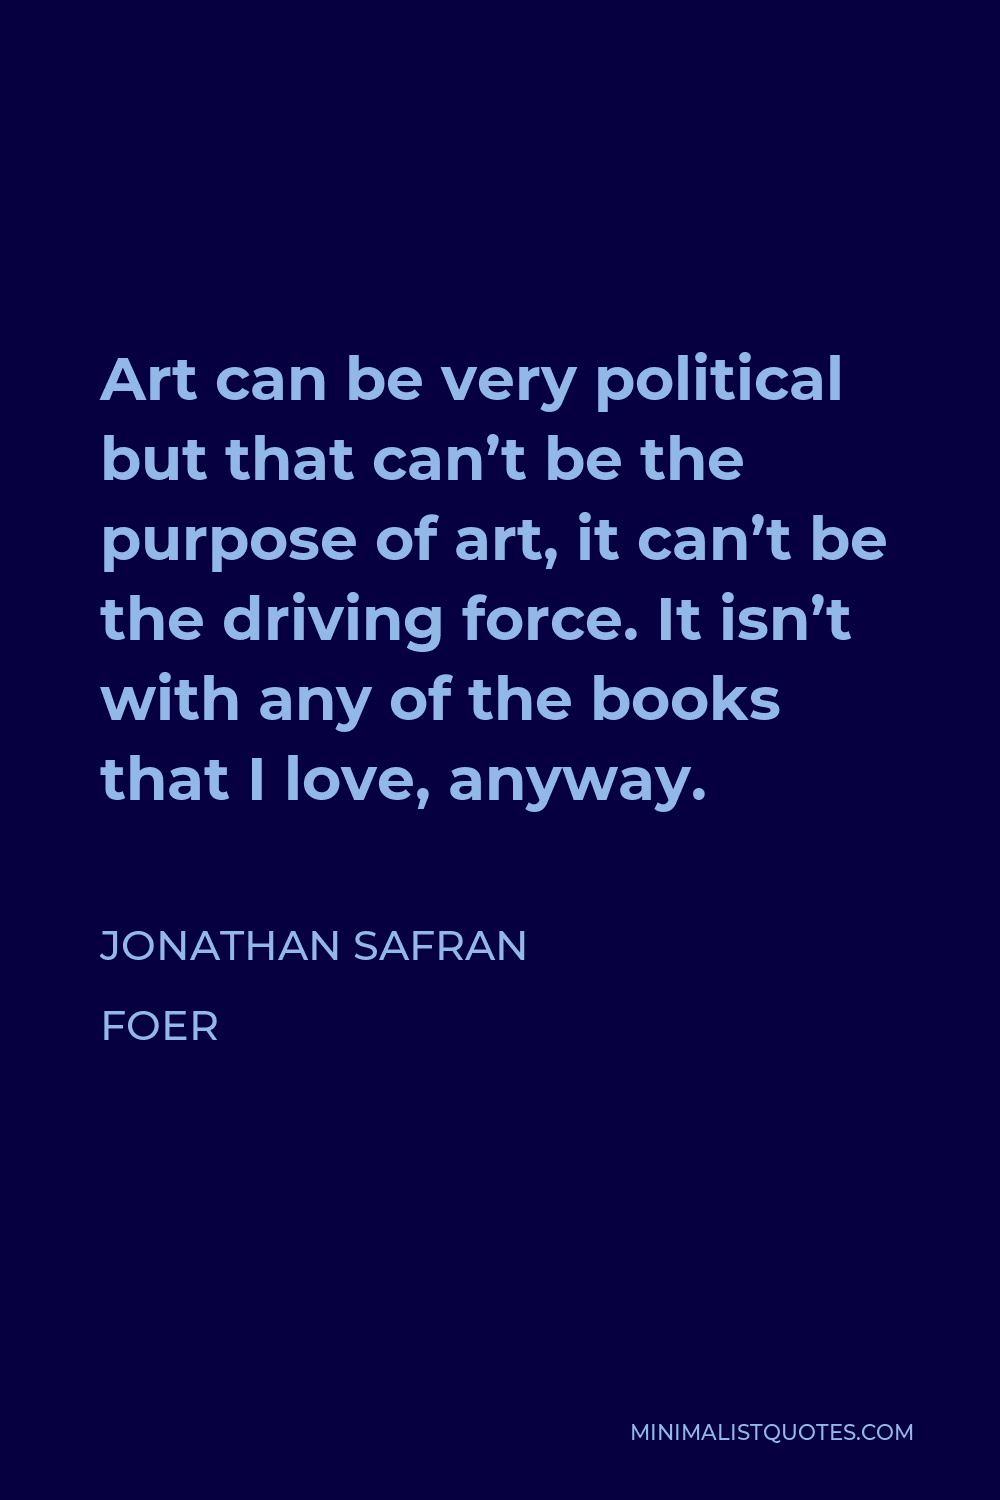 Jonathan Safran Foer Quote - Art can be very political but that can’t be the purpose of art, it can’t be the driving force. It isn’t with any of the books that I love, anyway.